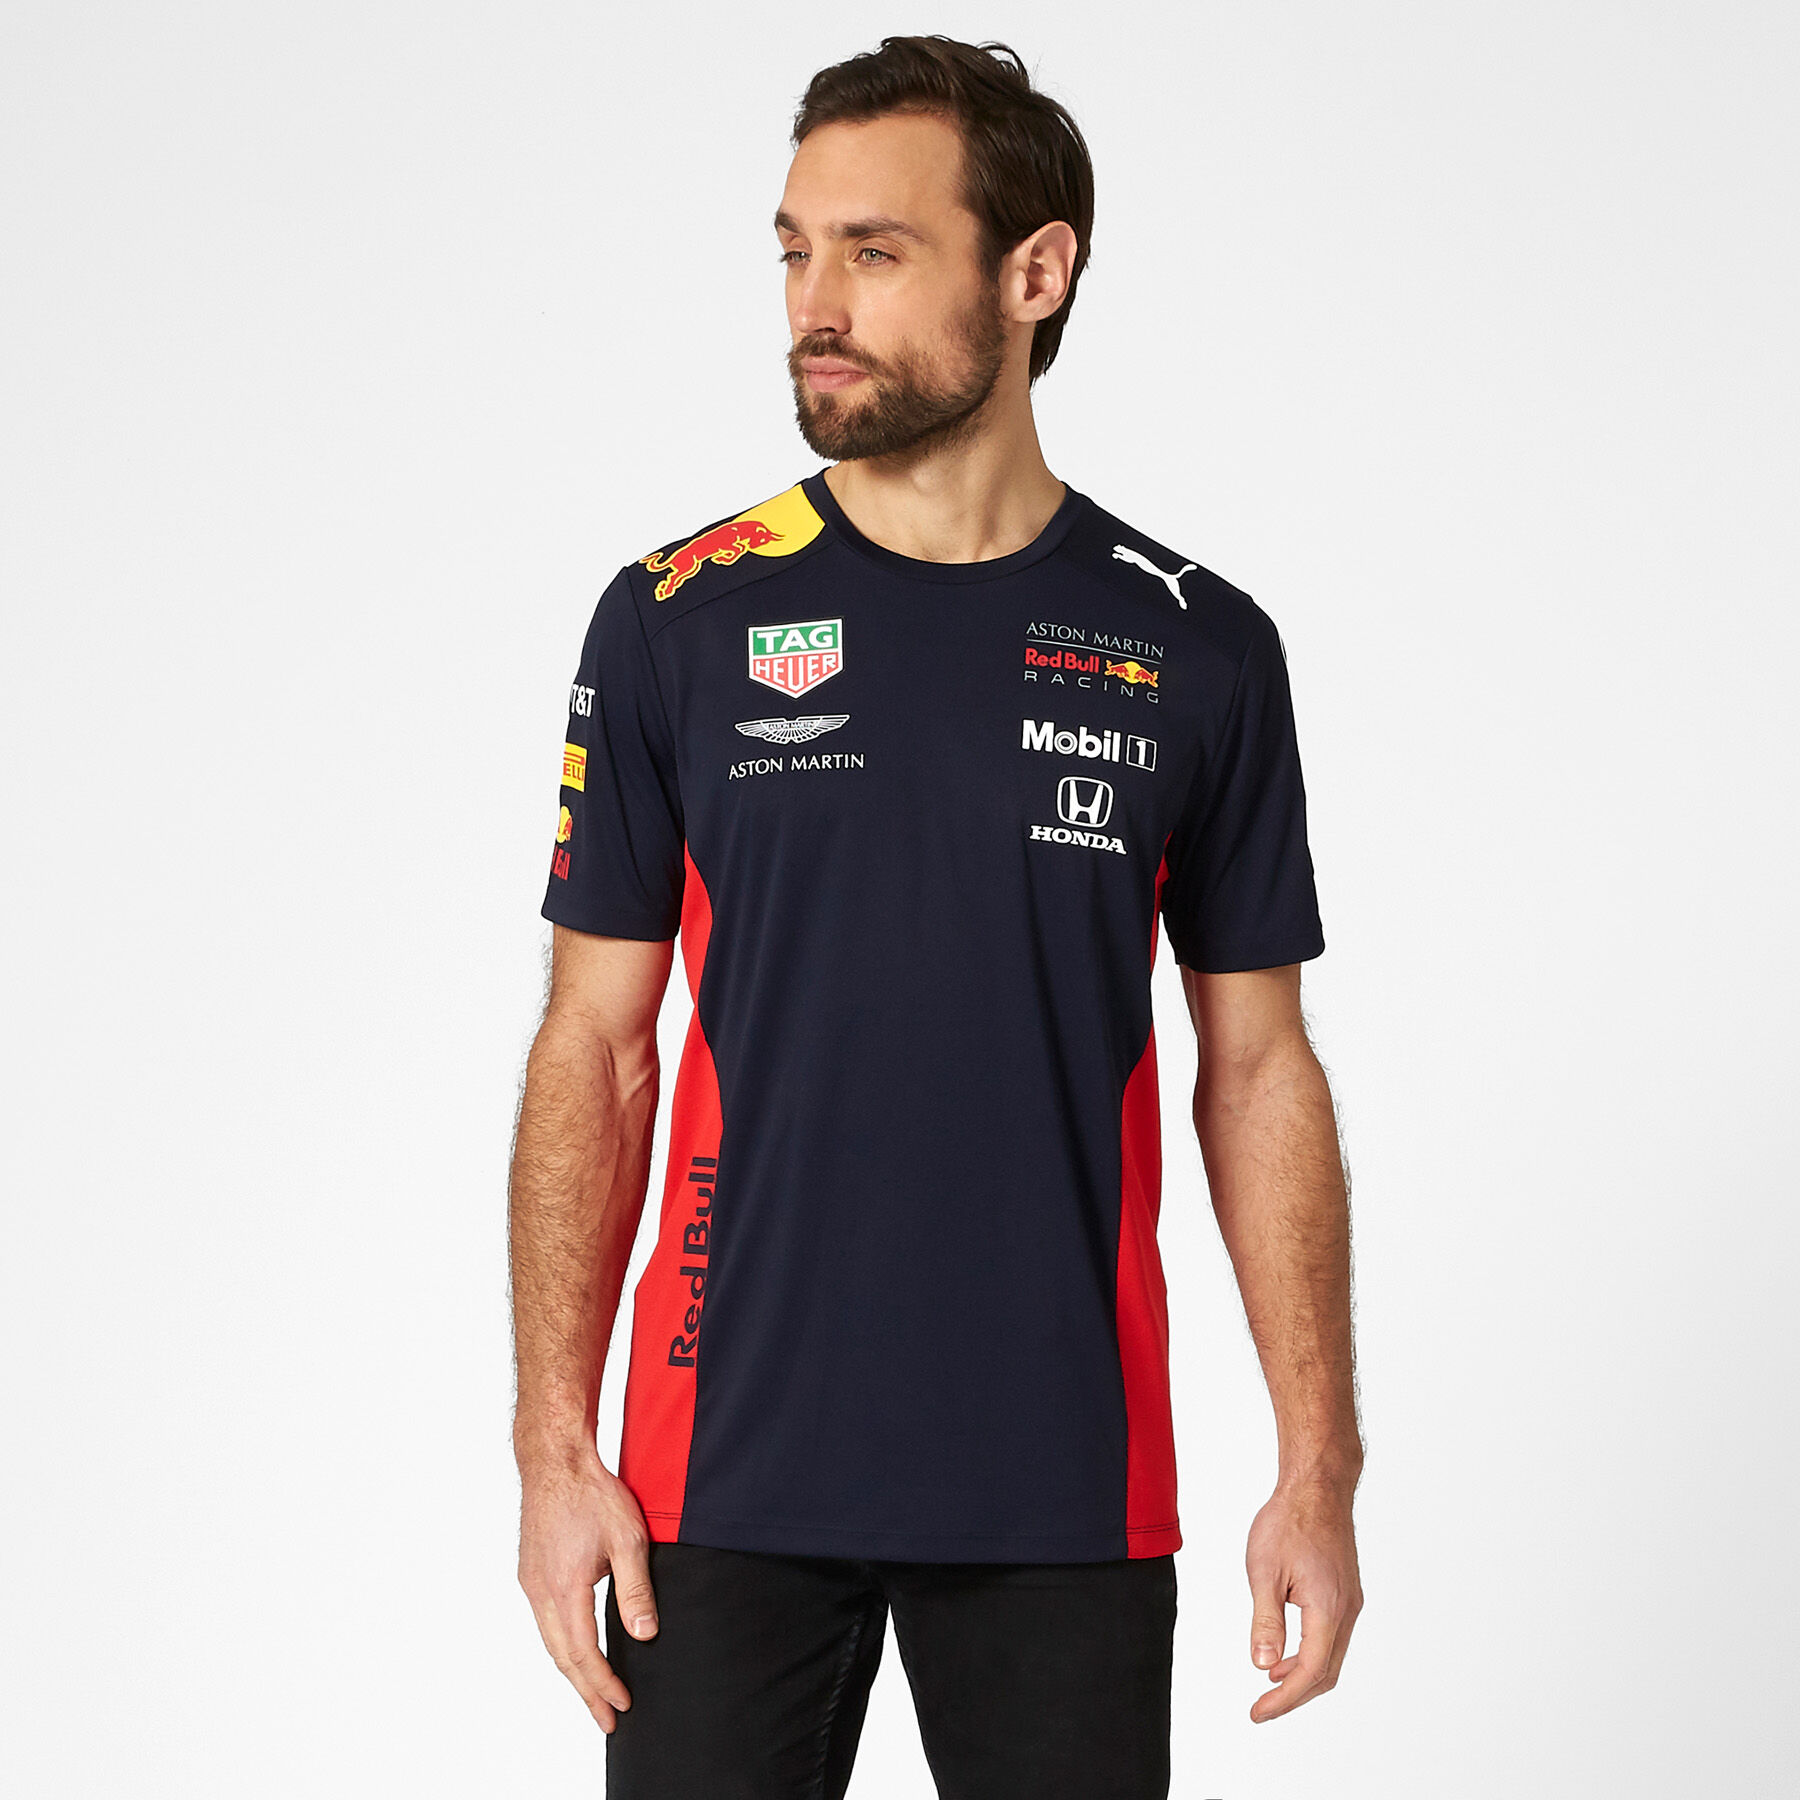 red bull t shirts for sale